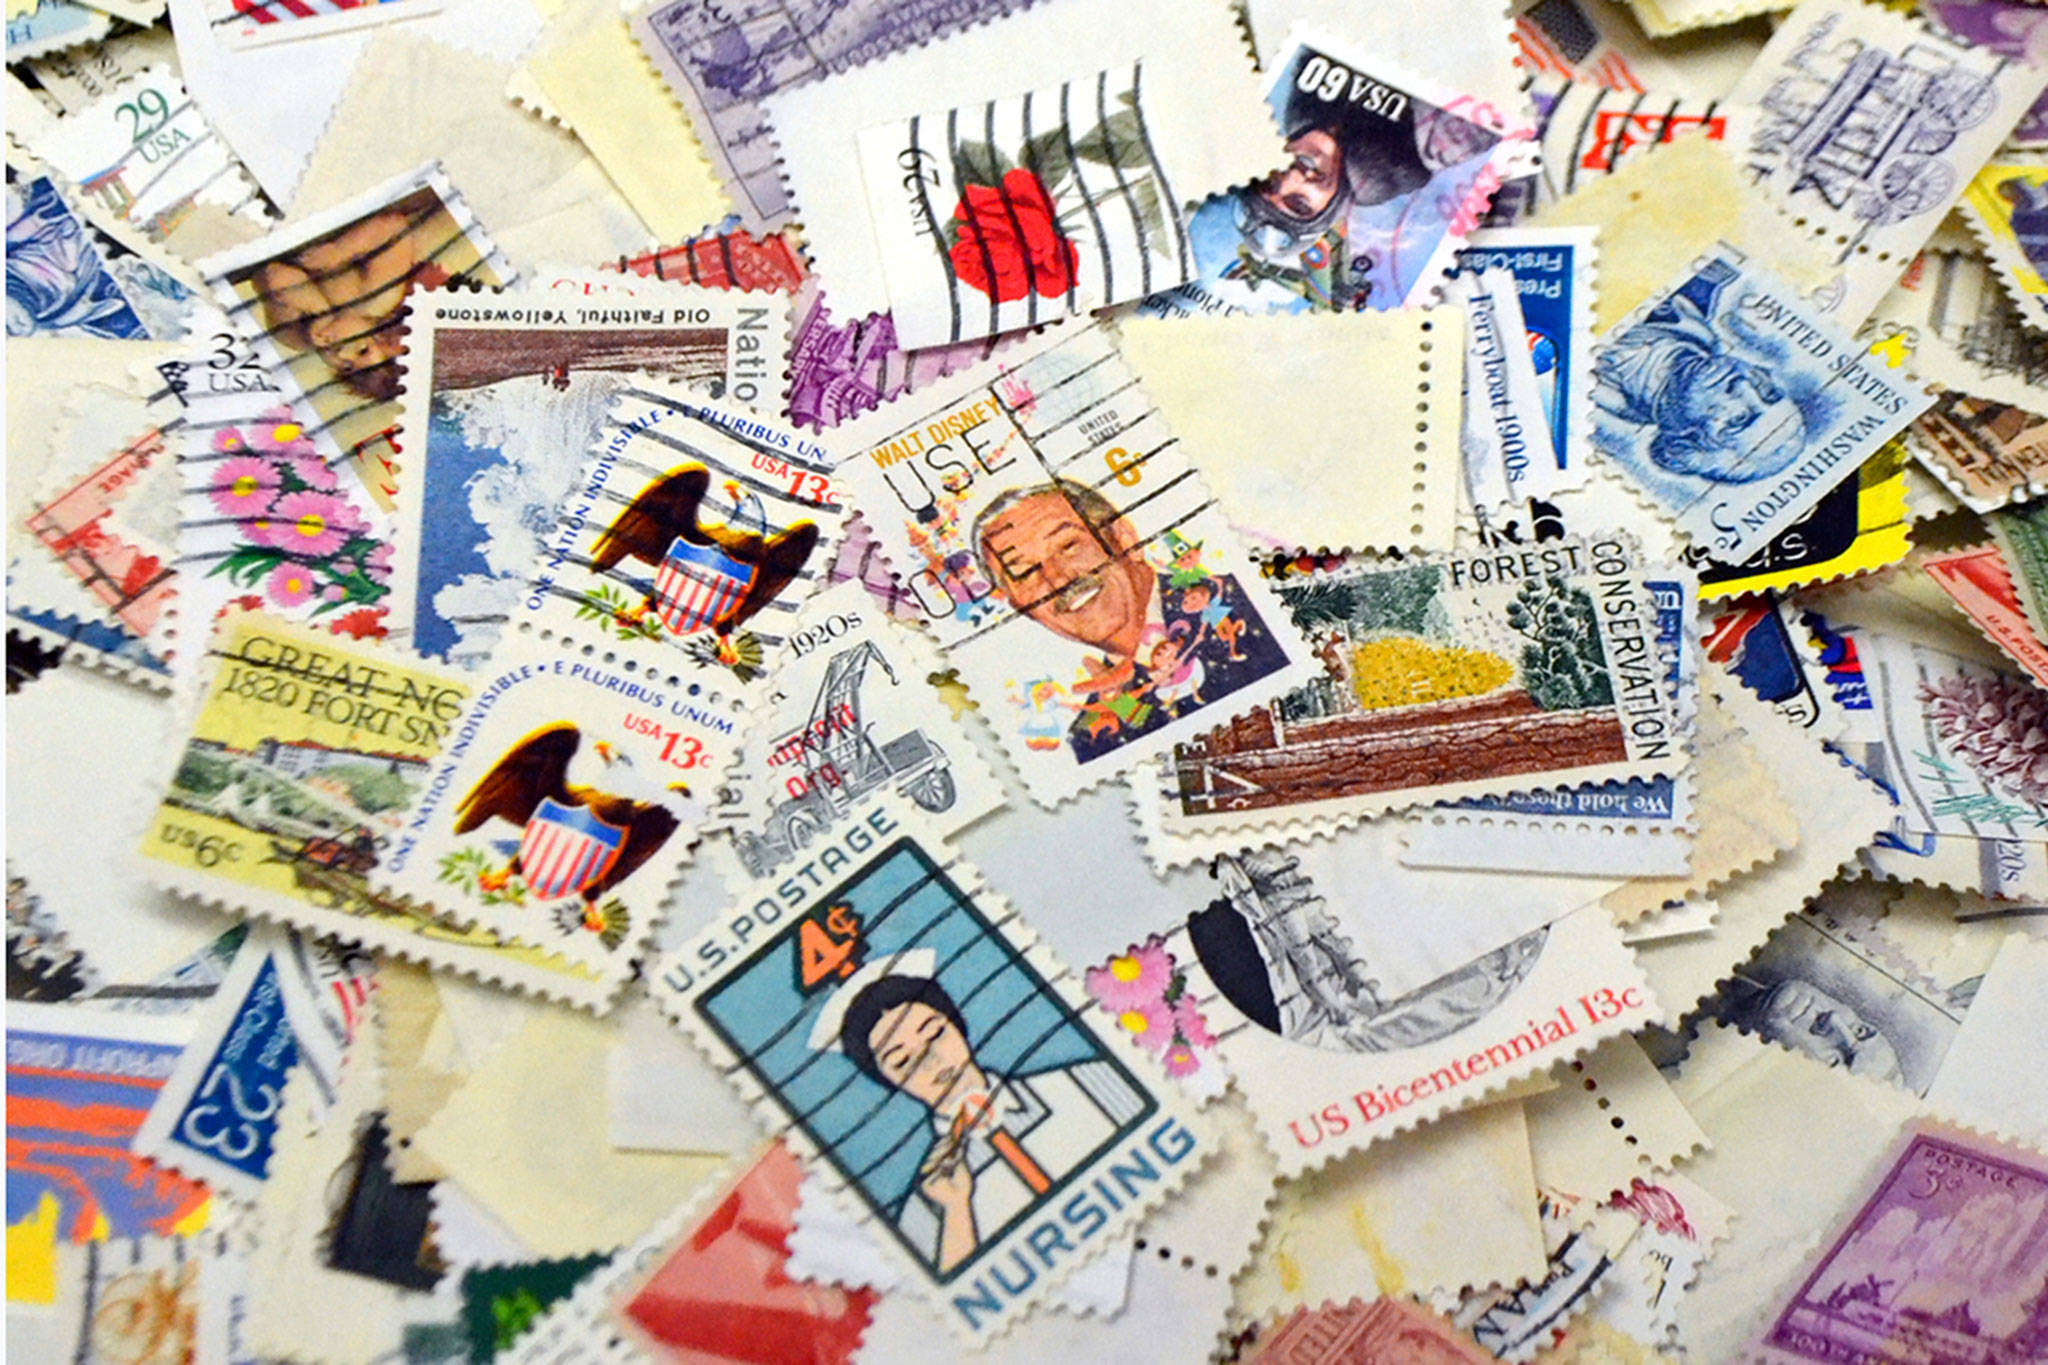 This year’s Strait Stamp Society show Saturday features 15-plus vendors and tens of thousands of stamps sold individually and in collections. (Matthew Nash/Olympic Peninsula News Group)